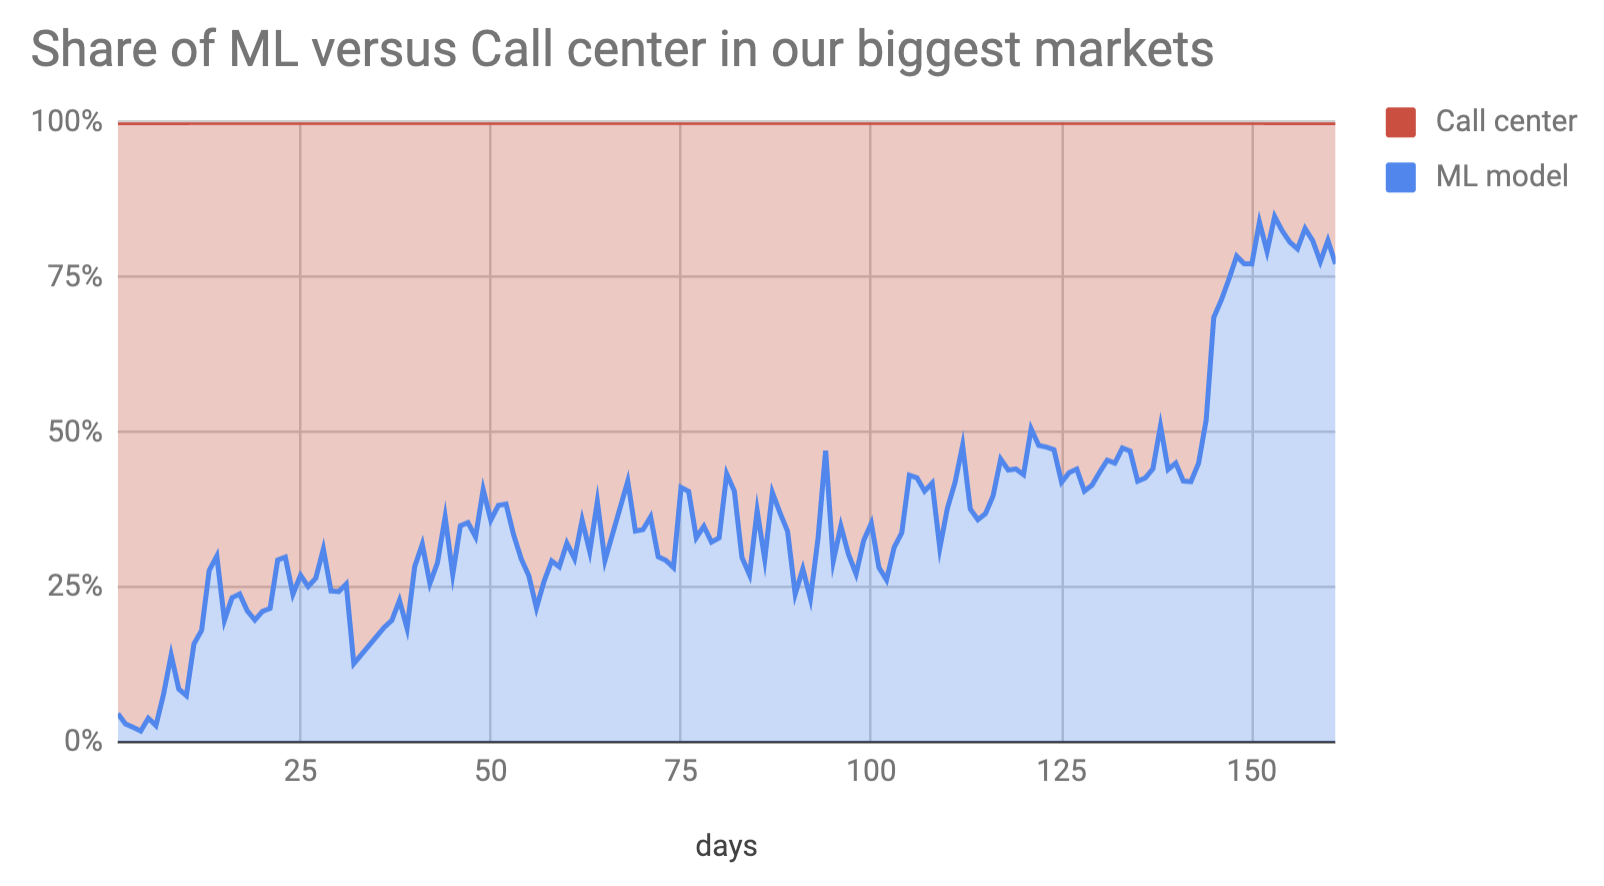 Share of ML scheduled versus Call center scheduled deliveries